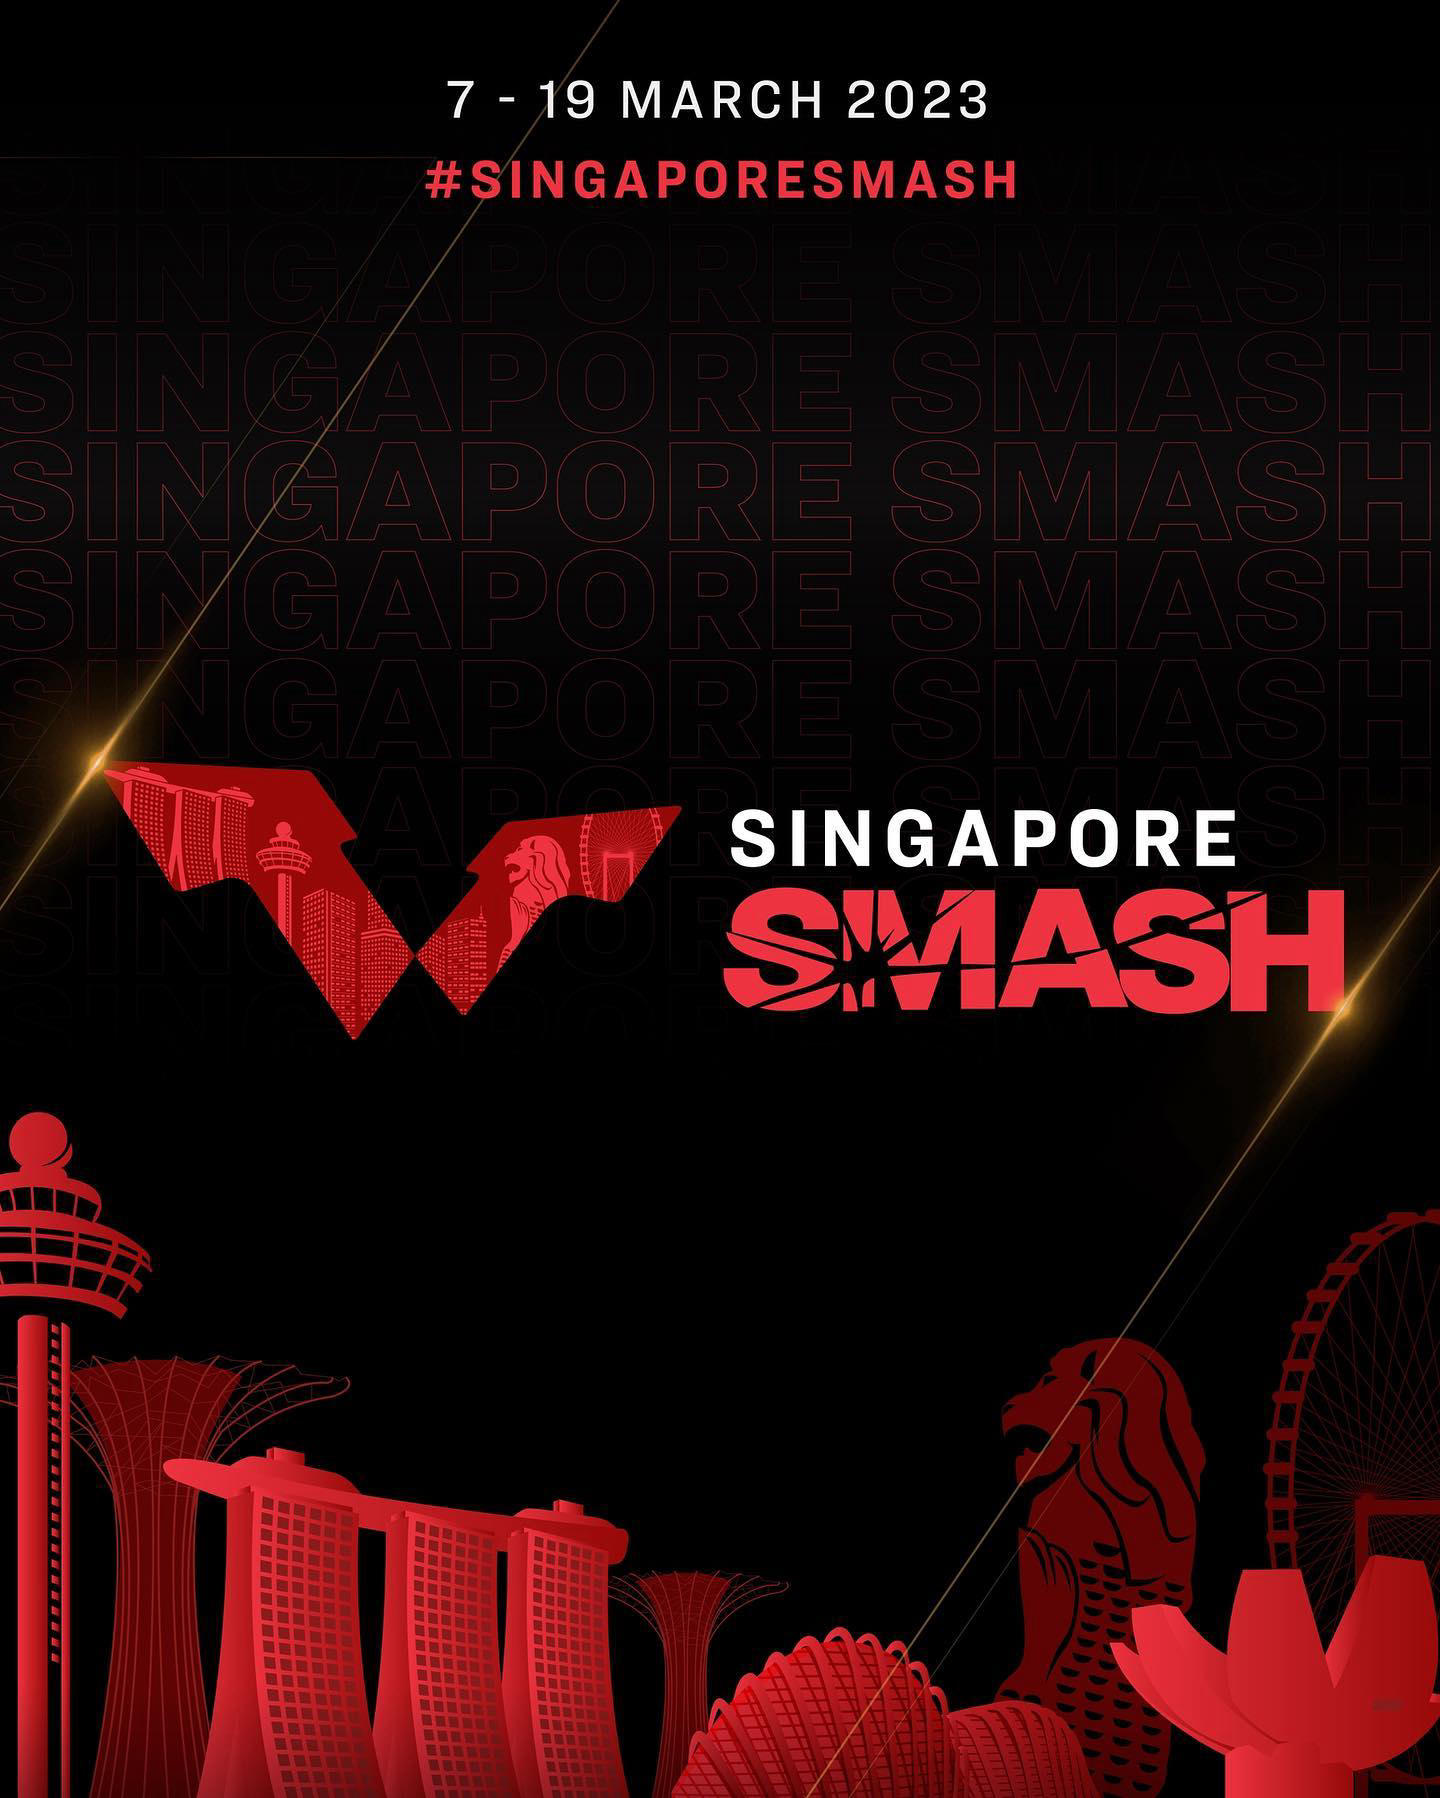 World Table Tennis - Singapore Smash is coming back with a bang 🇸🇬